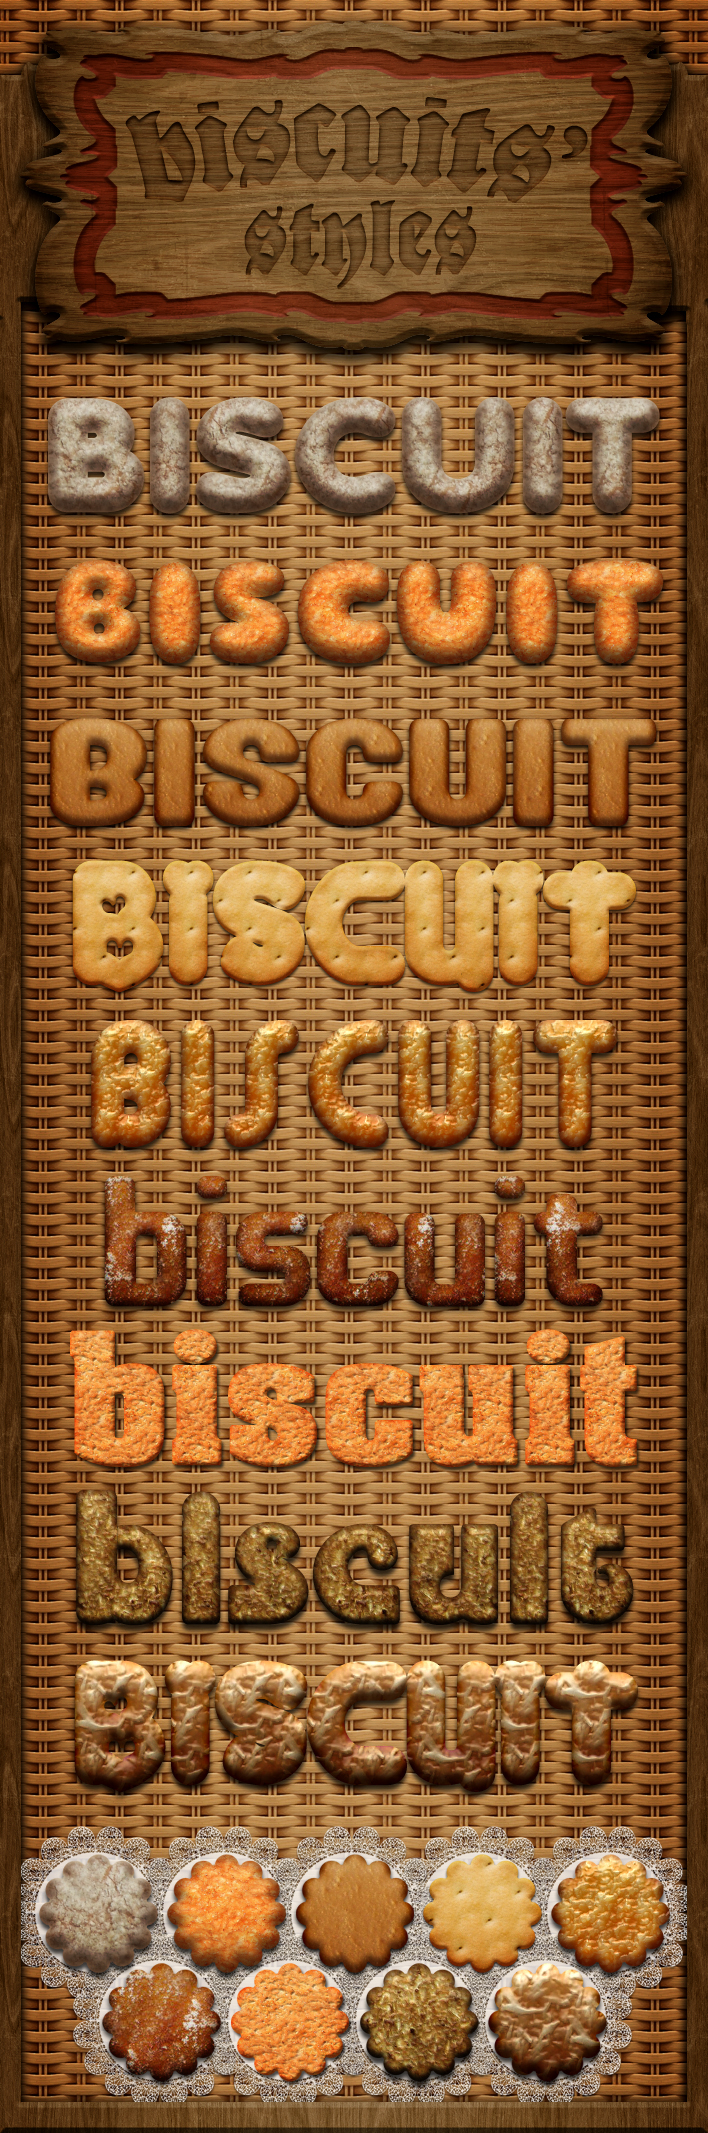 Biscuit'styles